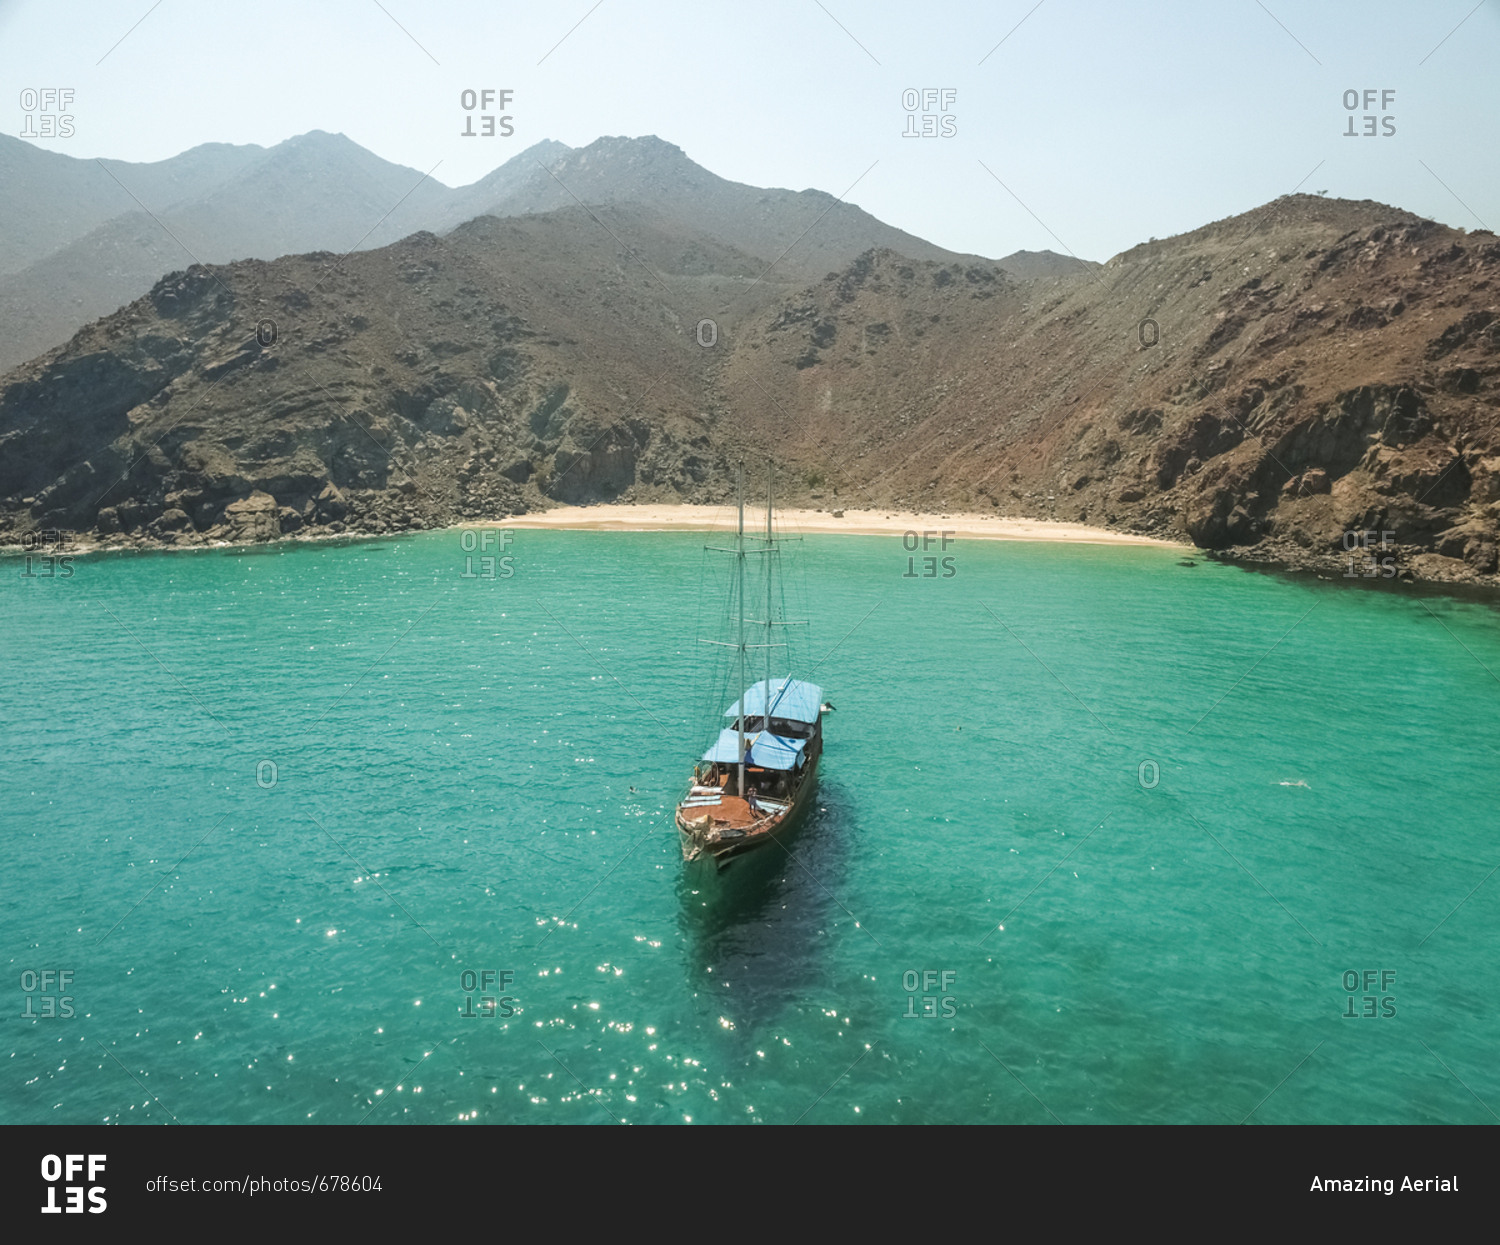 Aerial view of a sailboat in the picturesque bay of Khor Fakkan, United Arab Emirates.